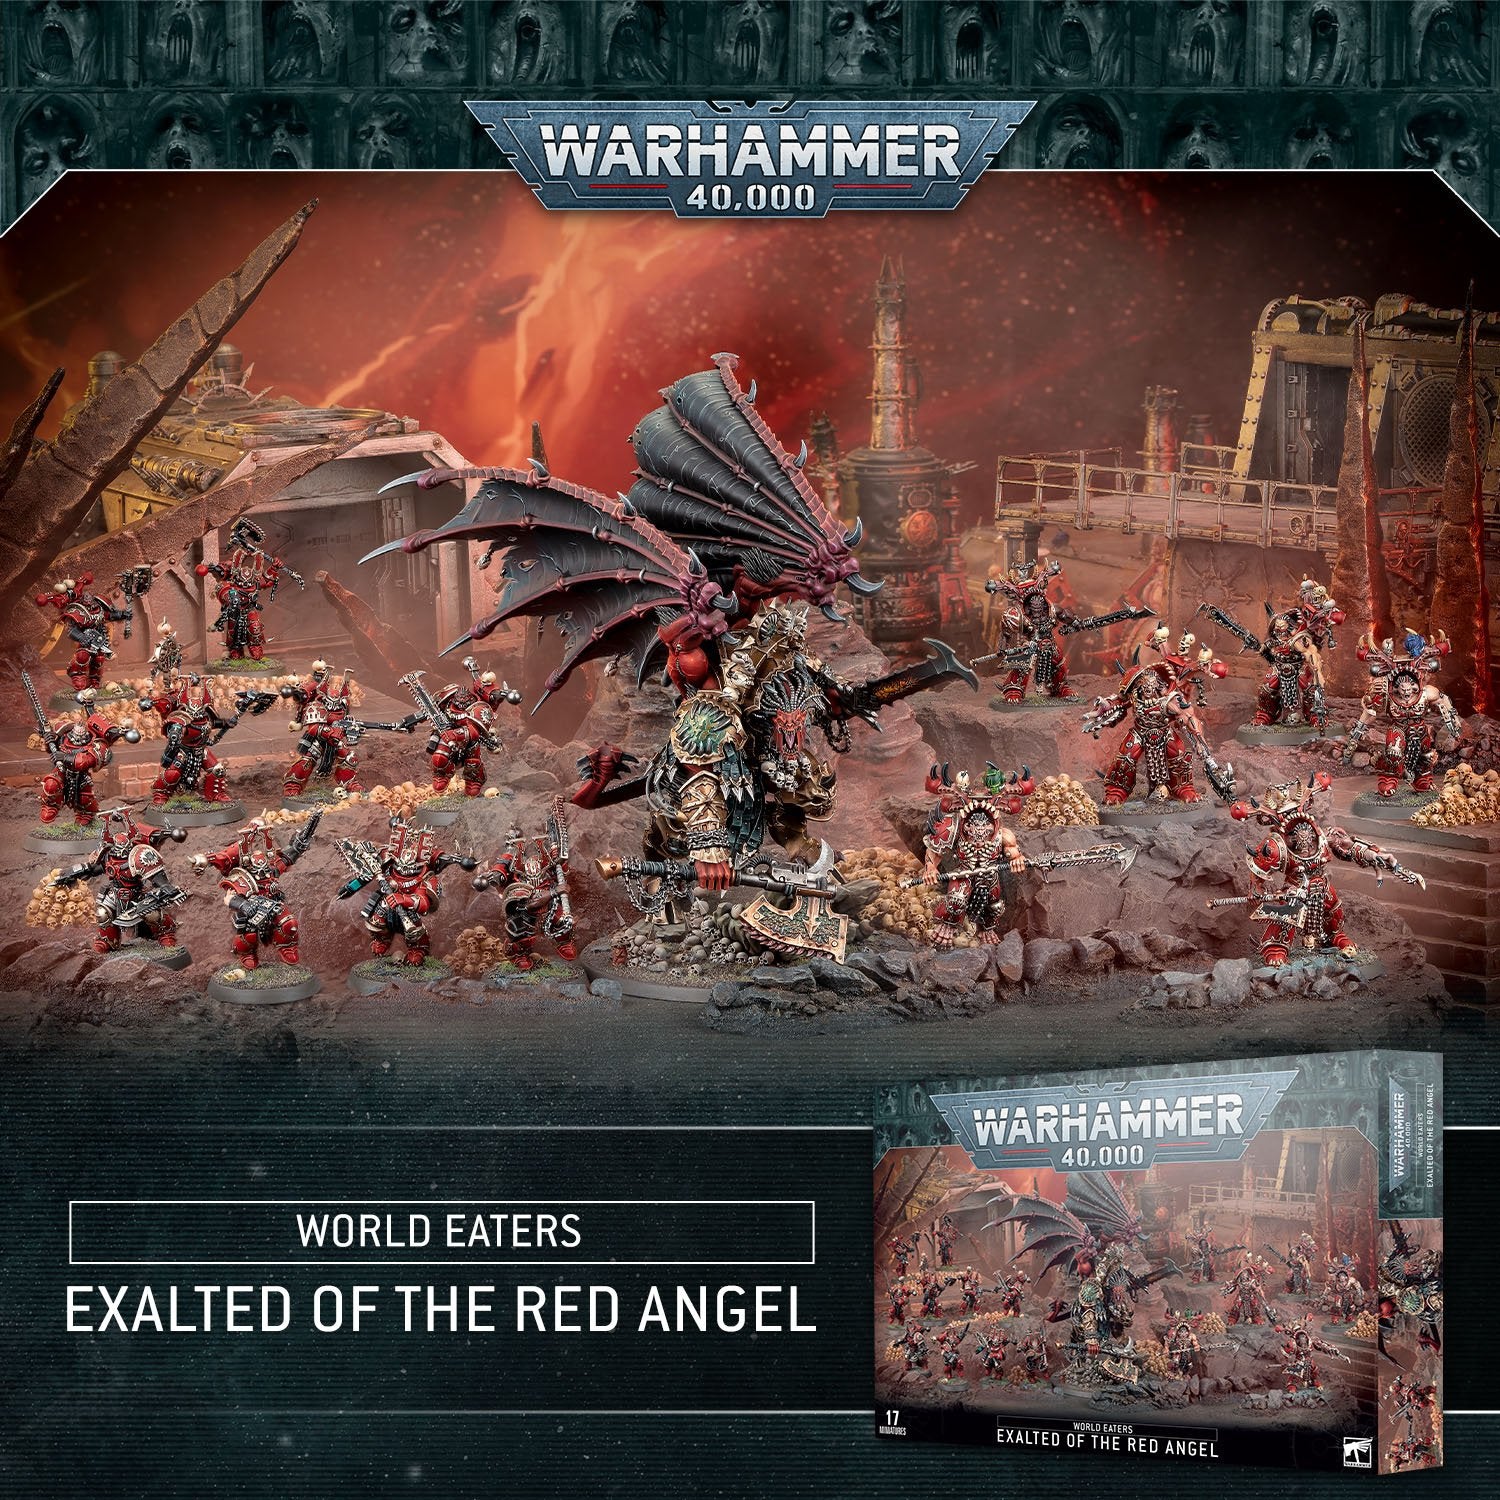 Warhammer 40k World Eaters: Exalted of the Red Angel - Bards & Cards